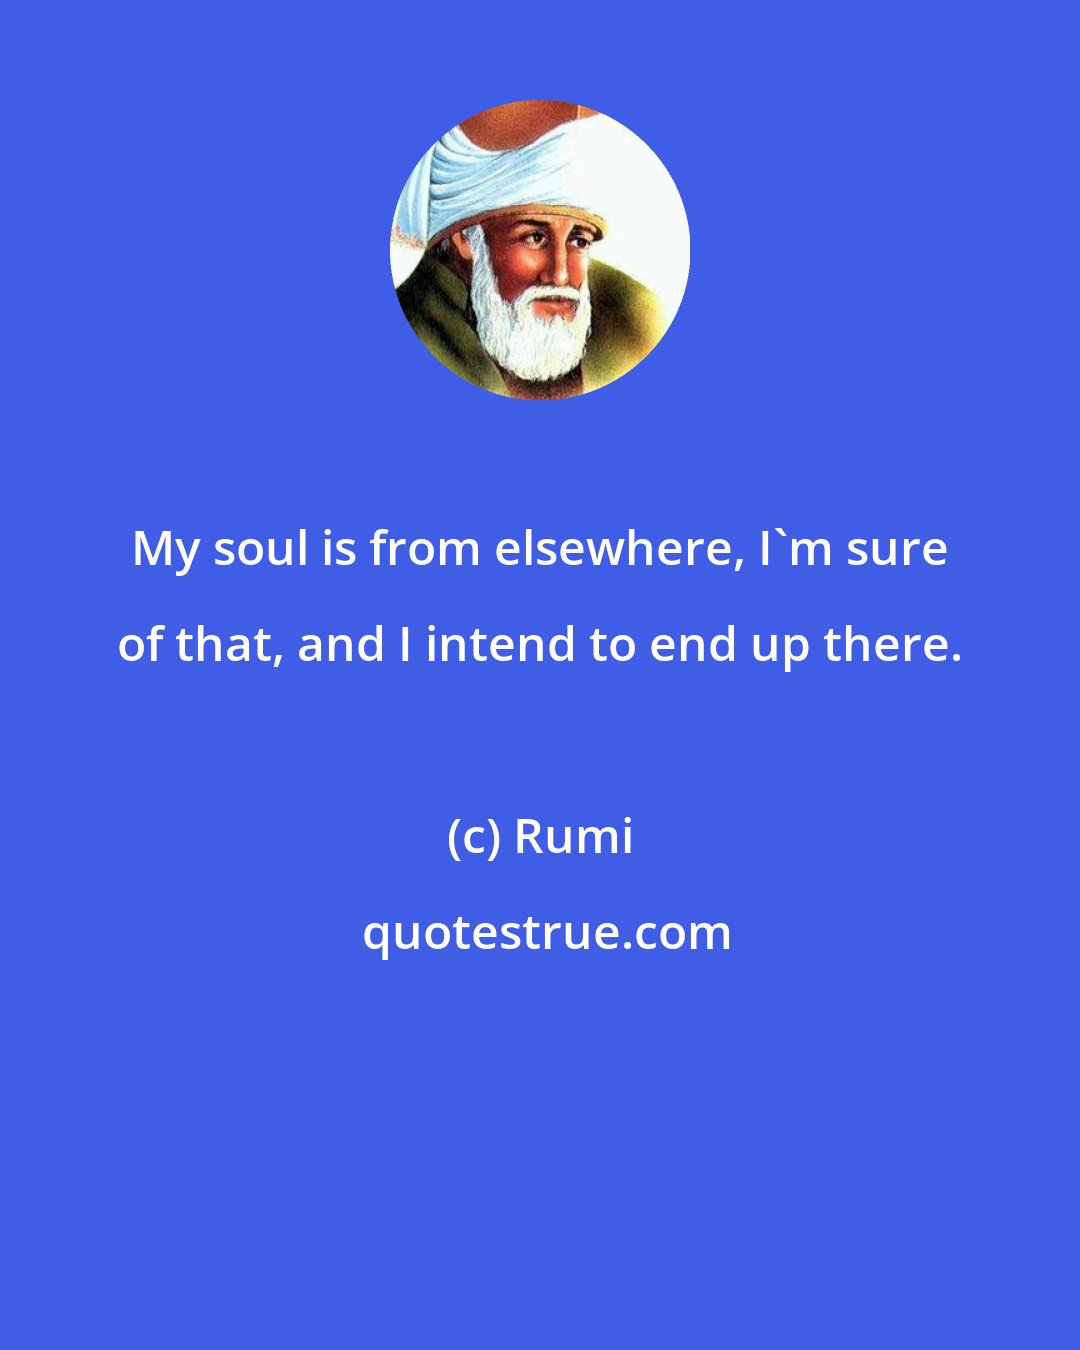 Rumi: My soul is from elsewhere, I'm sure of that, and I intend to end up there.